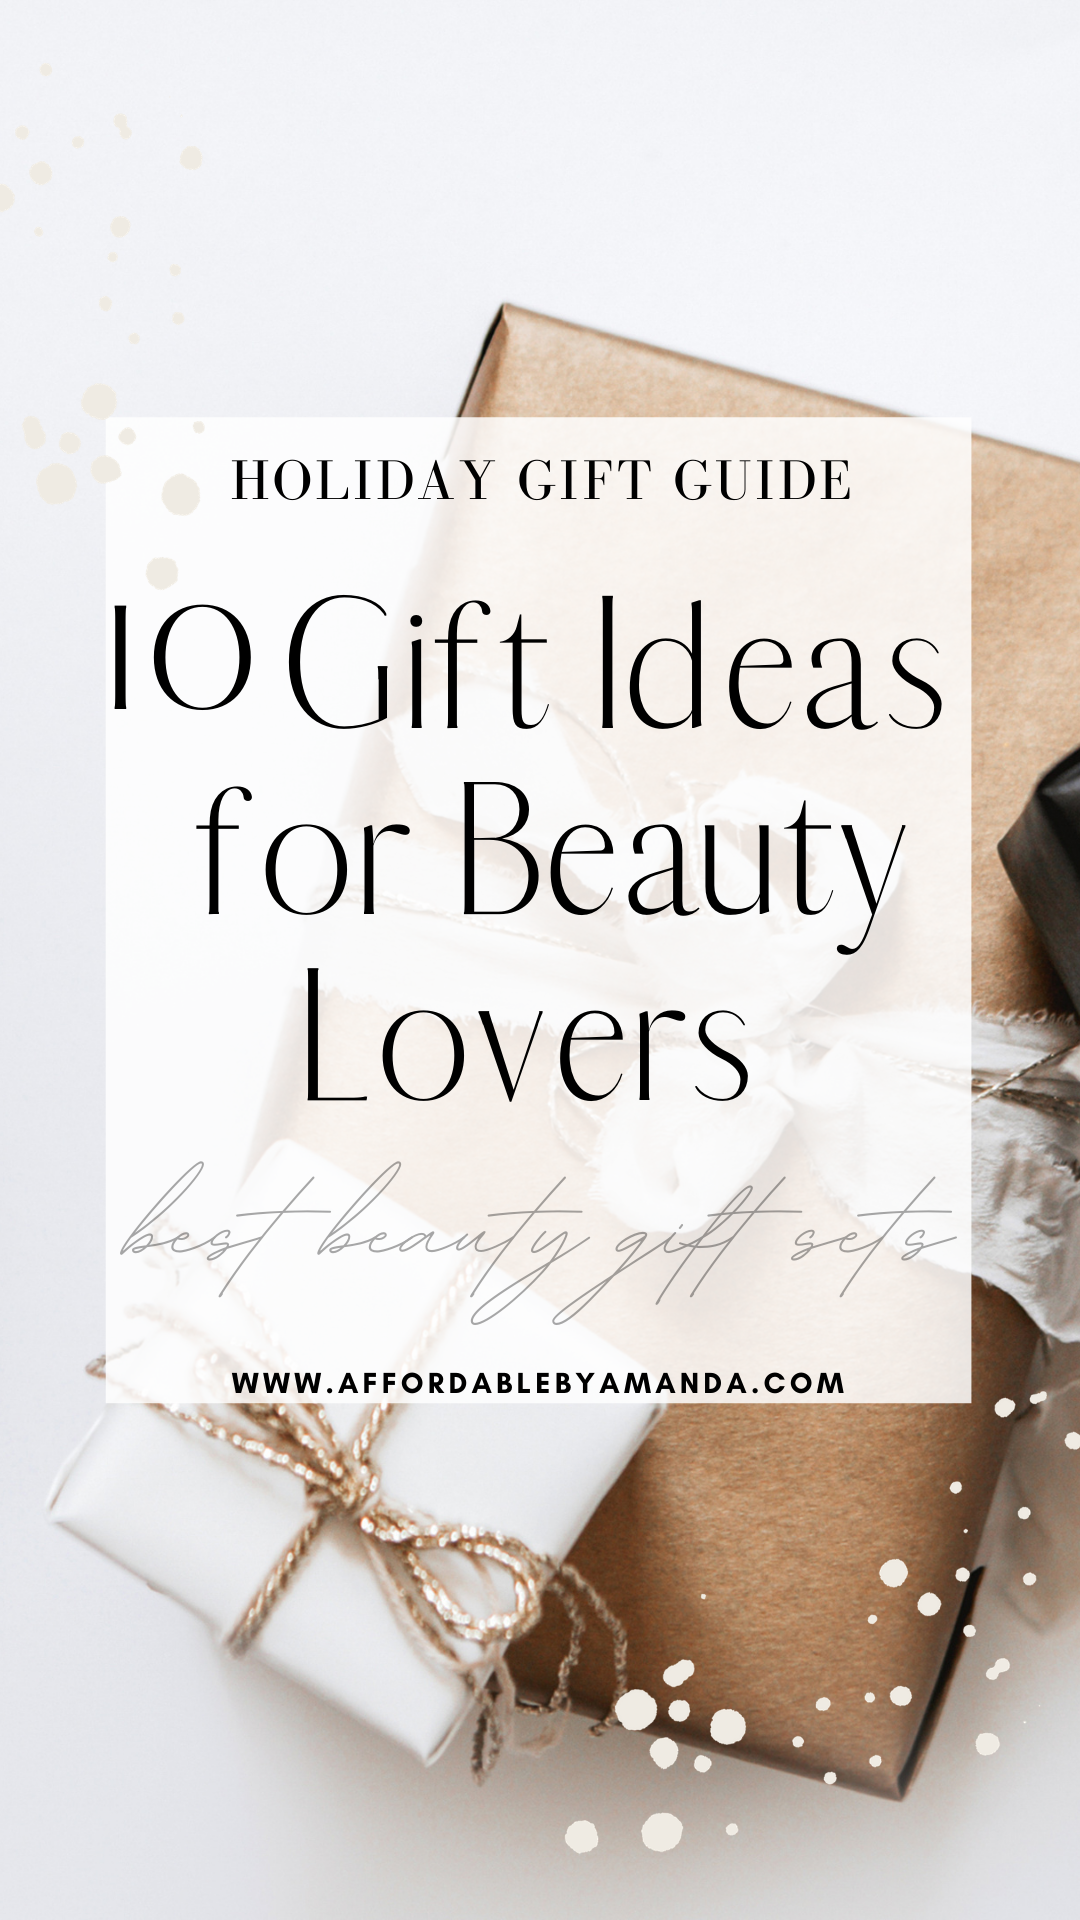 Holiday Gift Guide: Gifts for Beauty Lovers | Affordable by Amanda